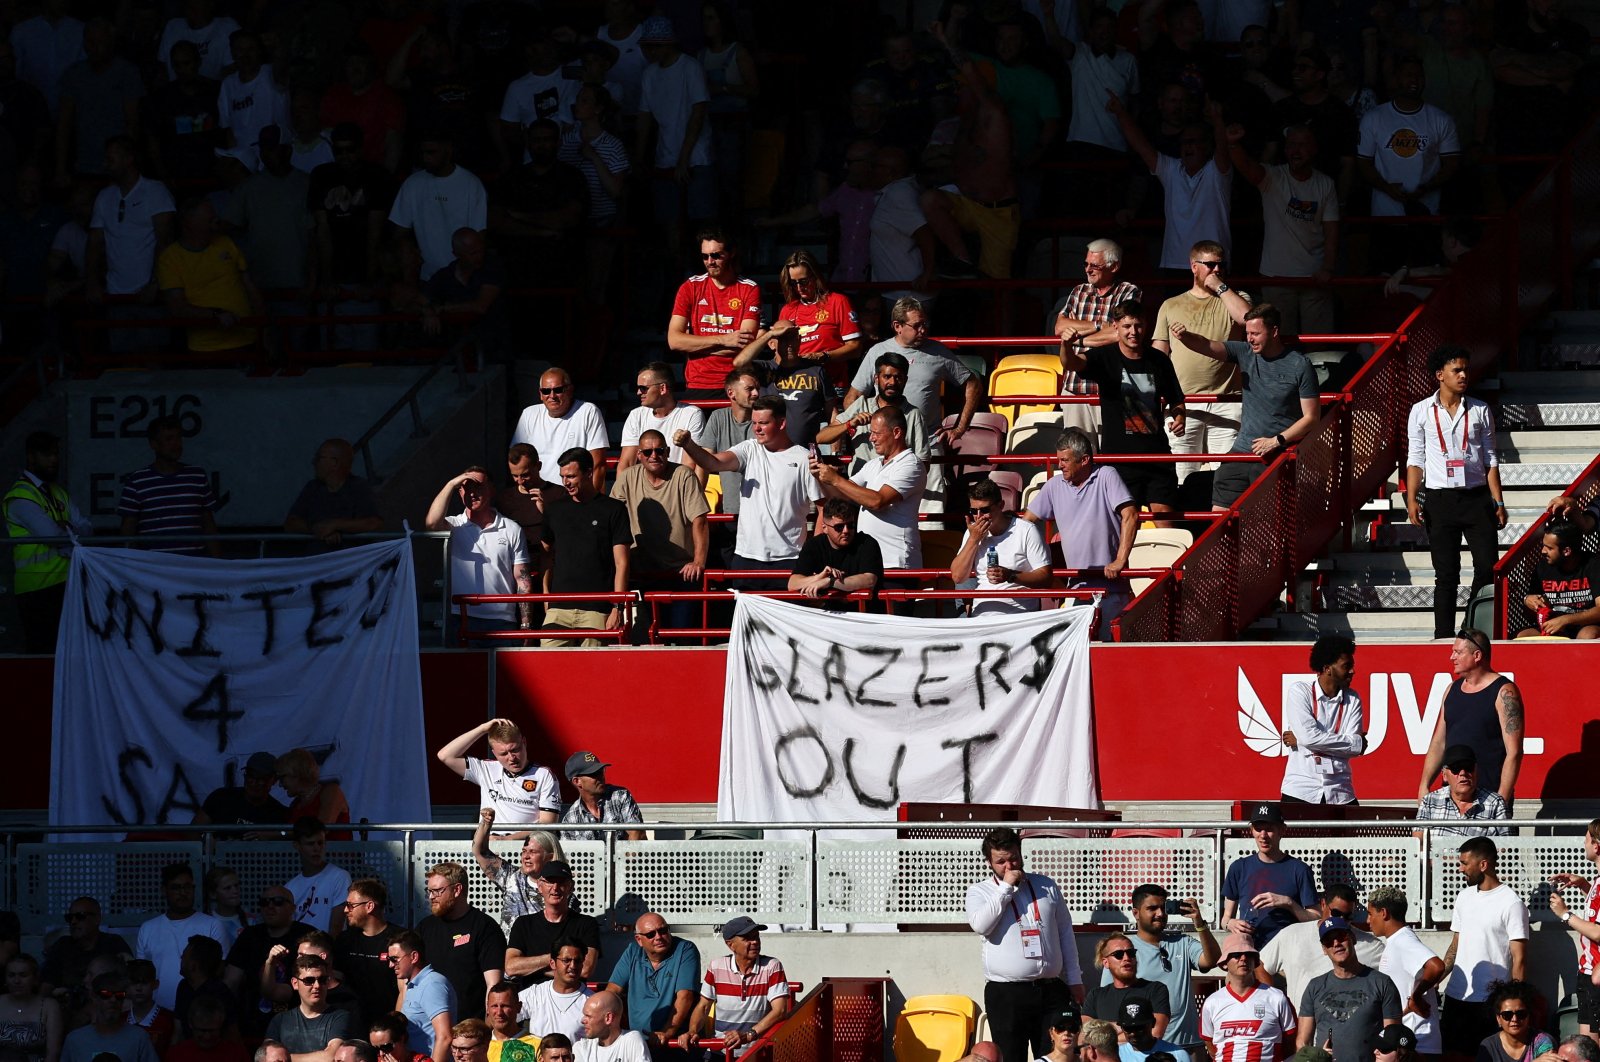 Man Utd fans display banners in protest of the Glazer family’s ownership of the club before a Premier League match against Brentford, London, England, Aug. 13, 2022. (Rueters Photo)